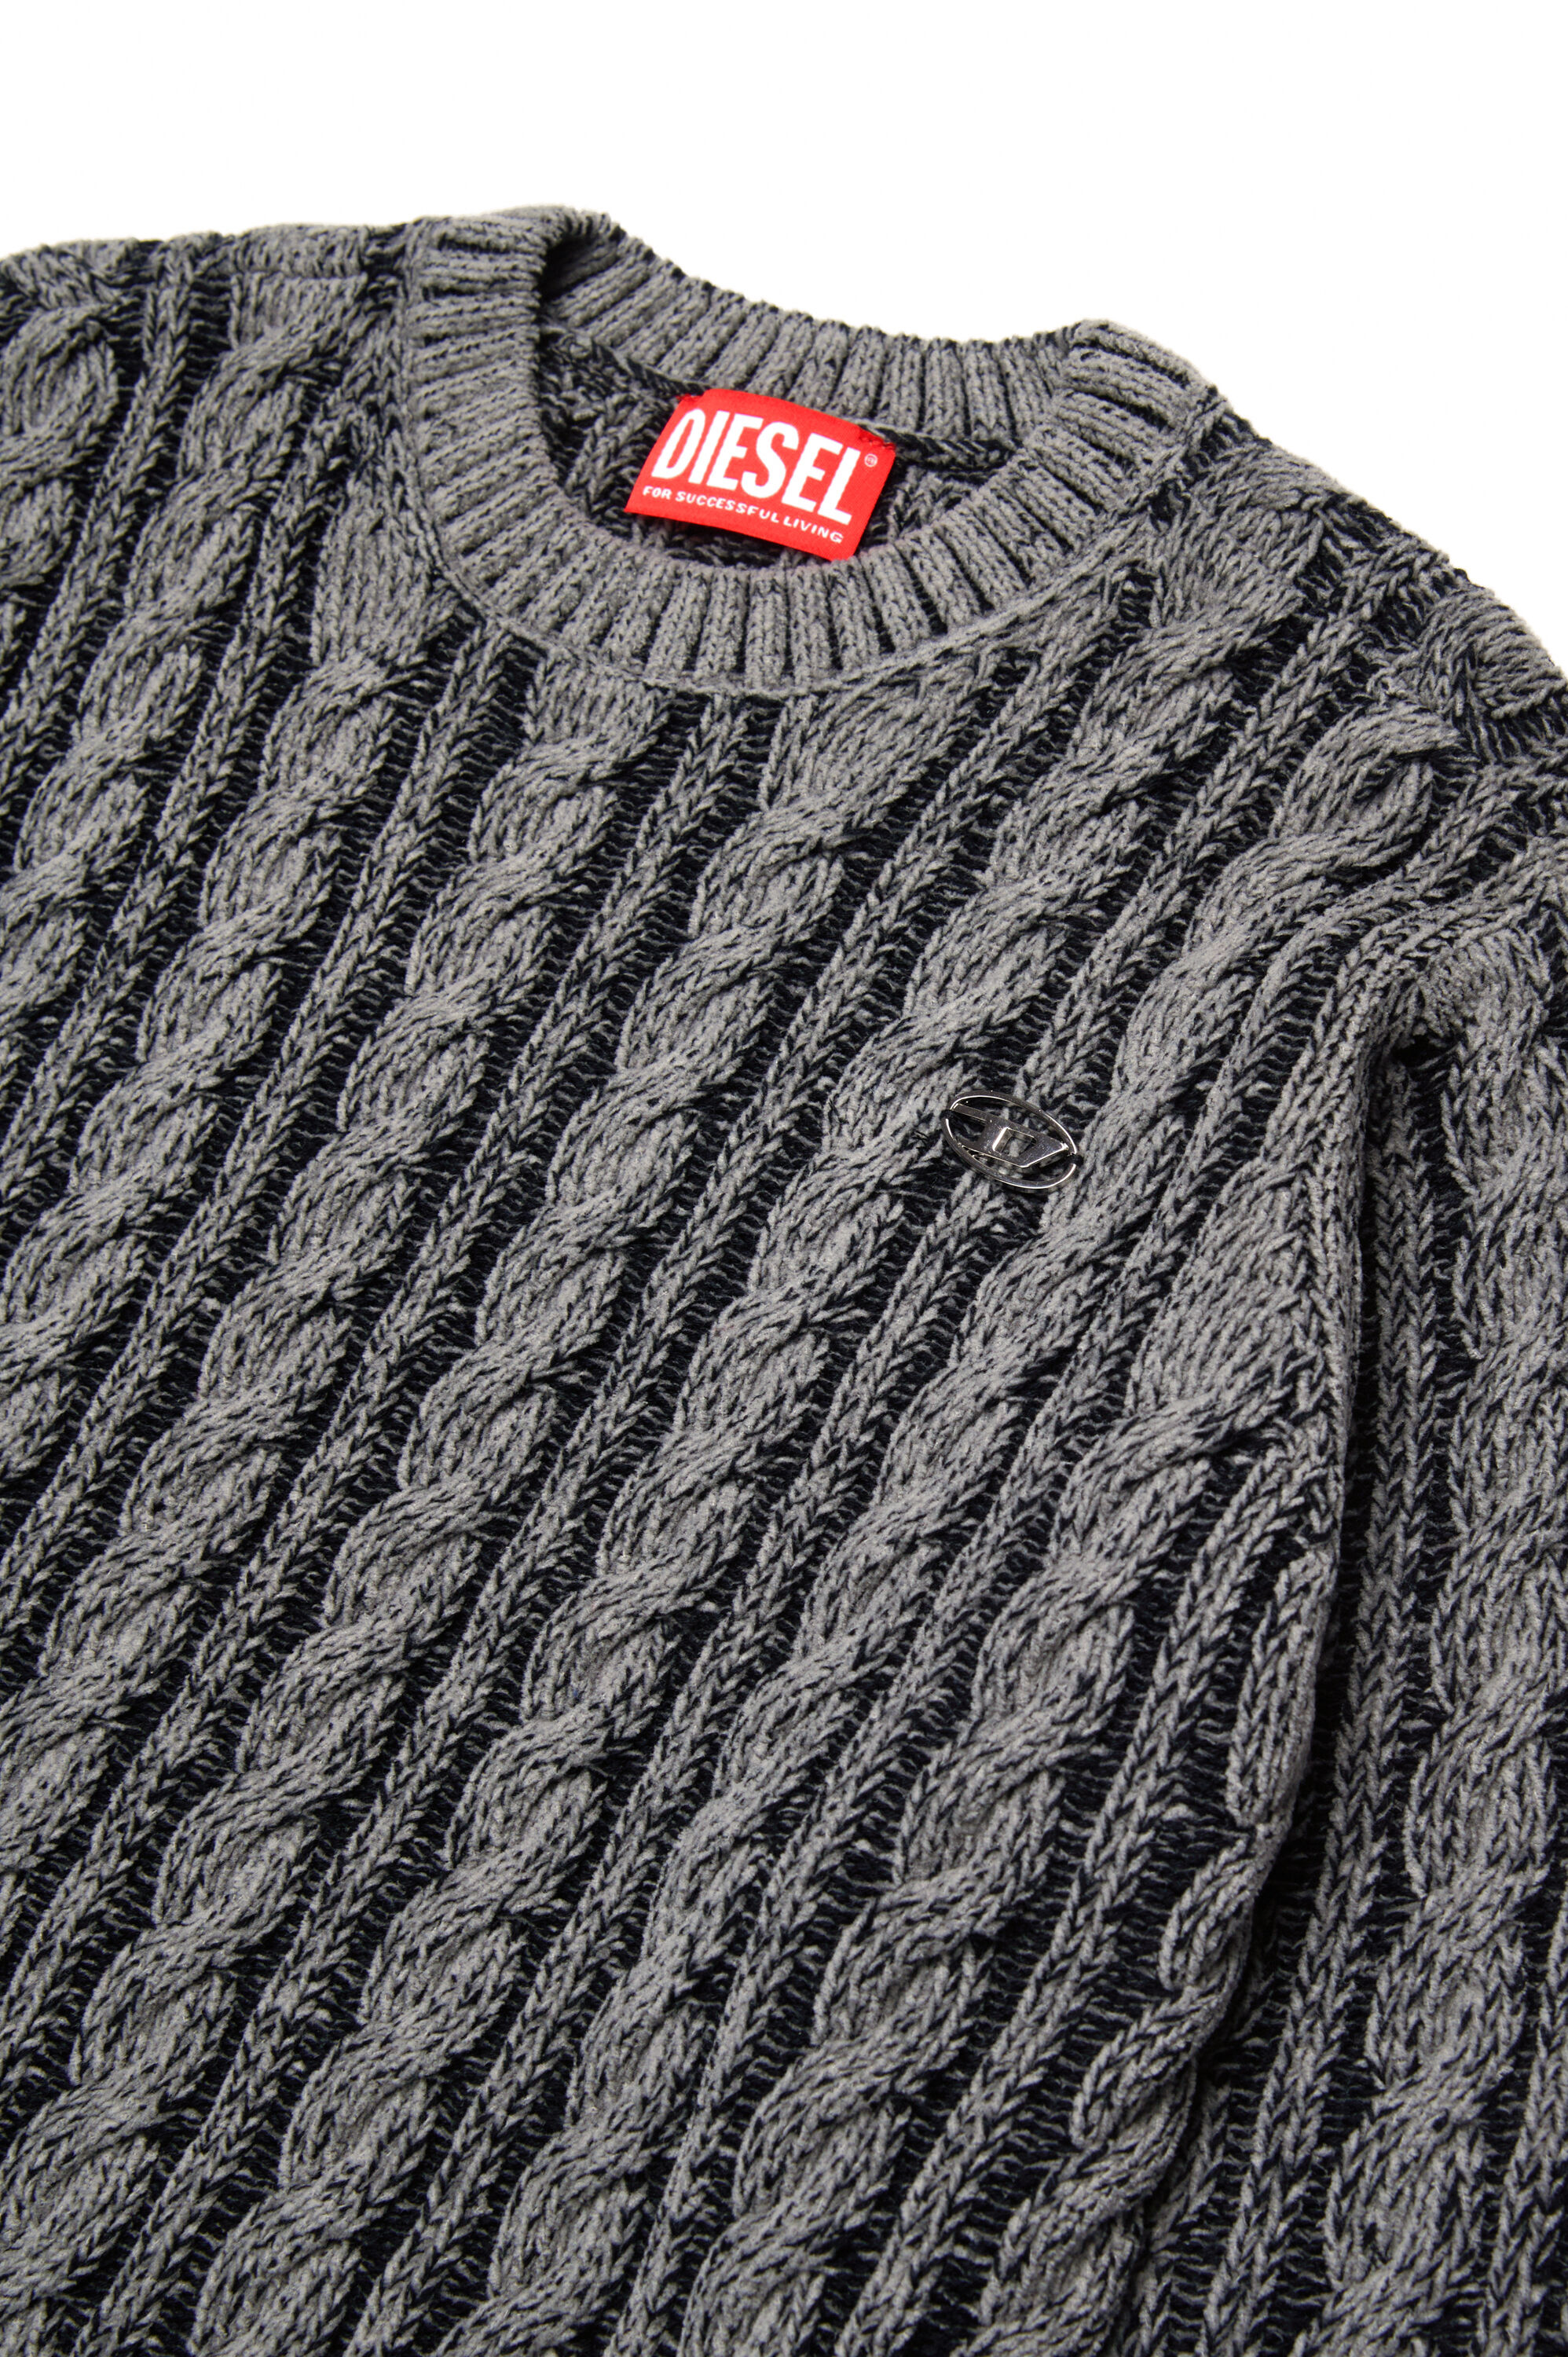 Diesel - KMOXIA OVER, Unisex Cable-knit jumper in two-tone yarn in Black - Image 3